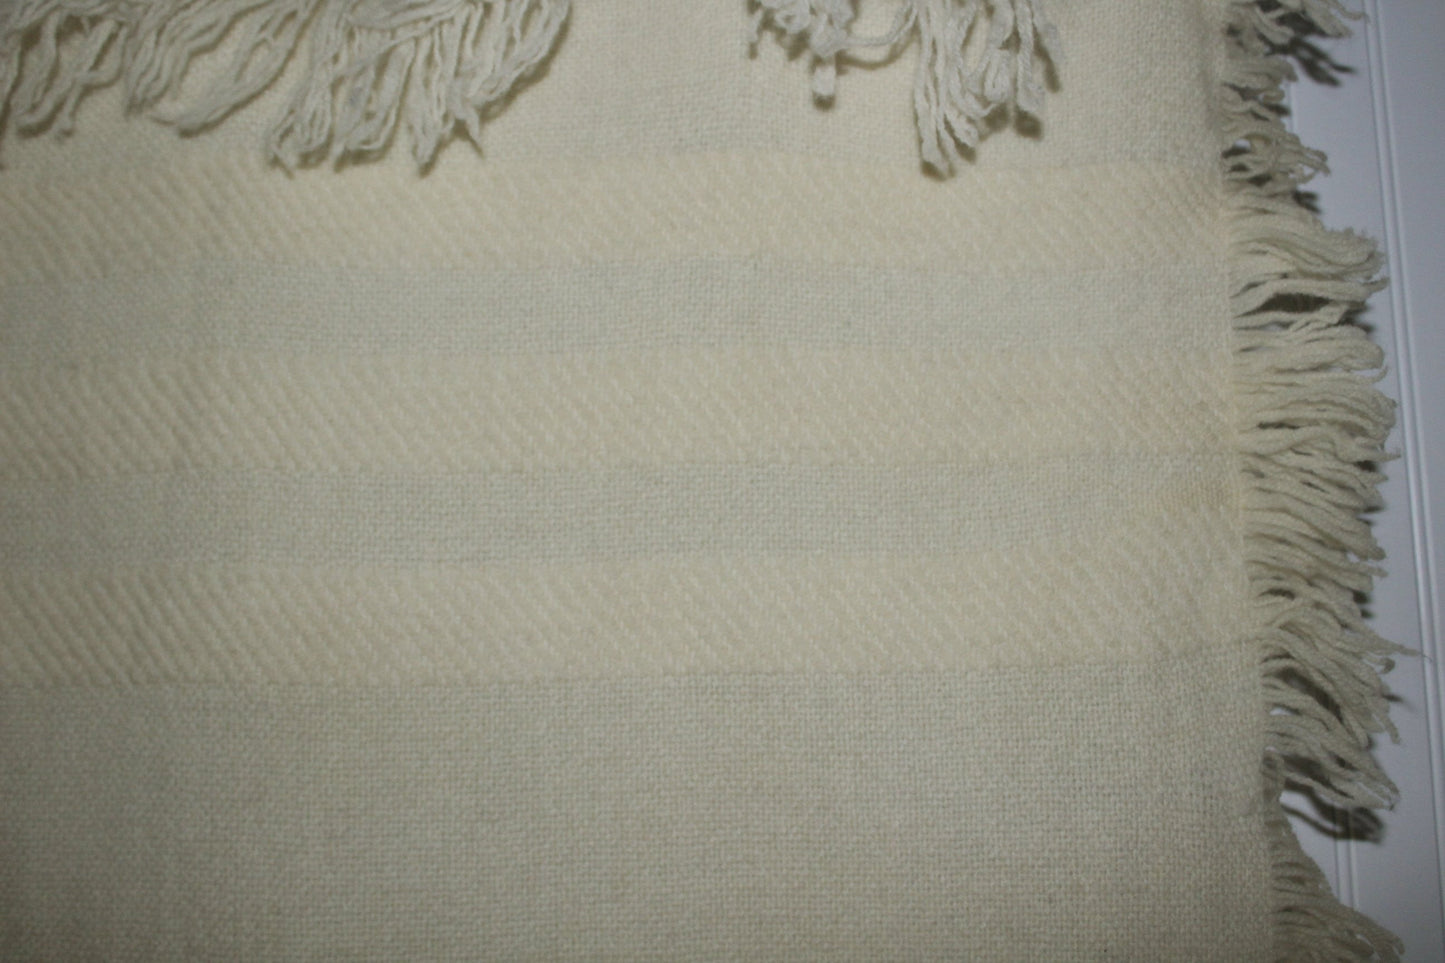 Wool Throw Hand Woven Ivory Fringe 4 Sides Churchill No Tag lovely